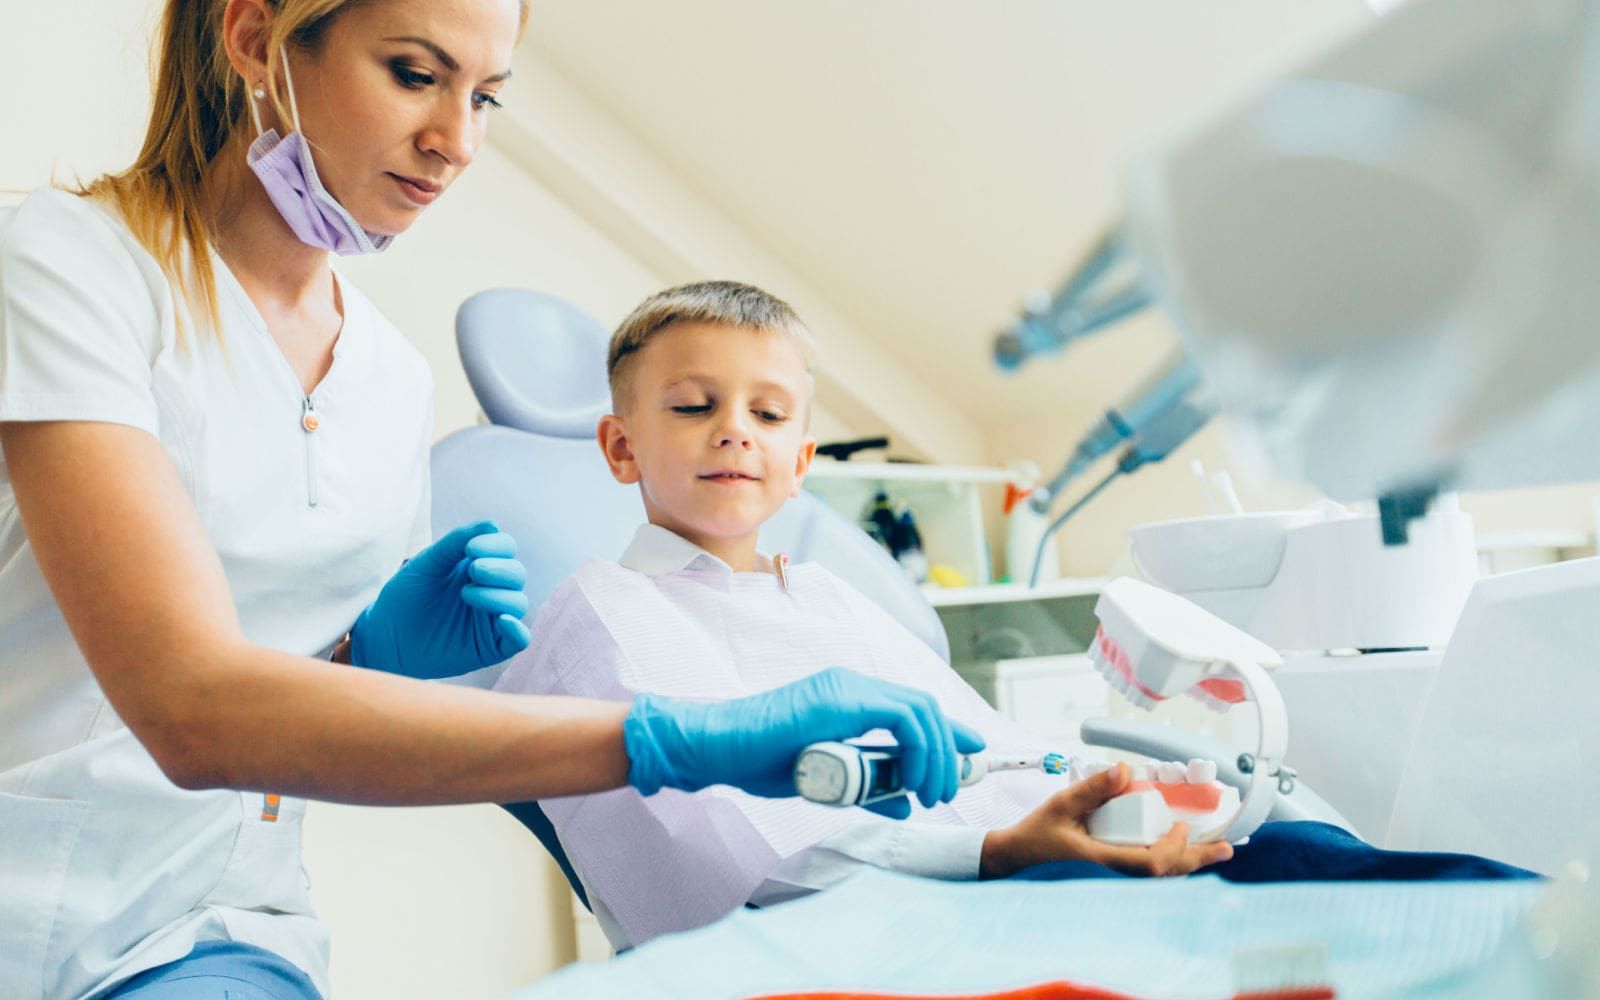 Child Recieving Dental Care from Dental Assistant